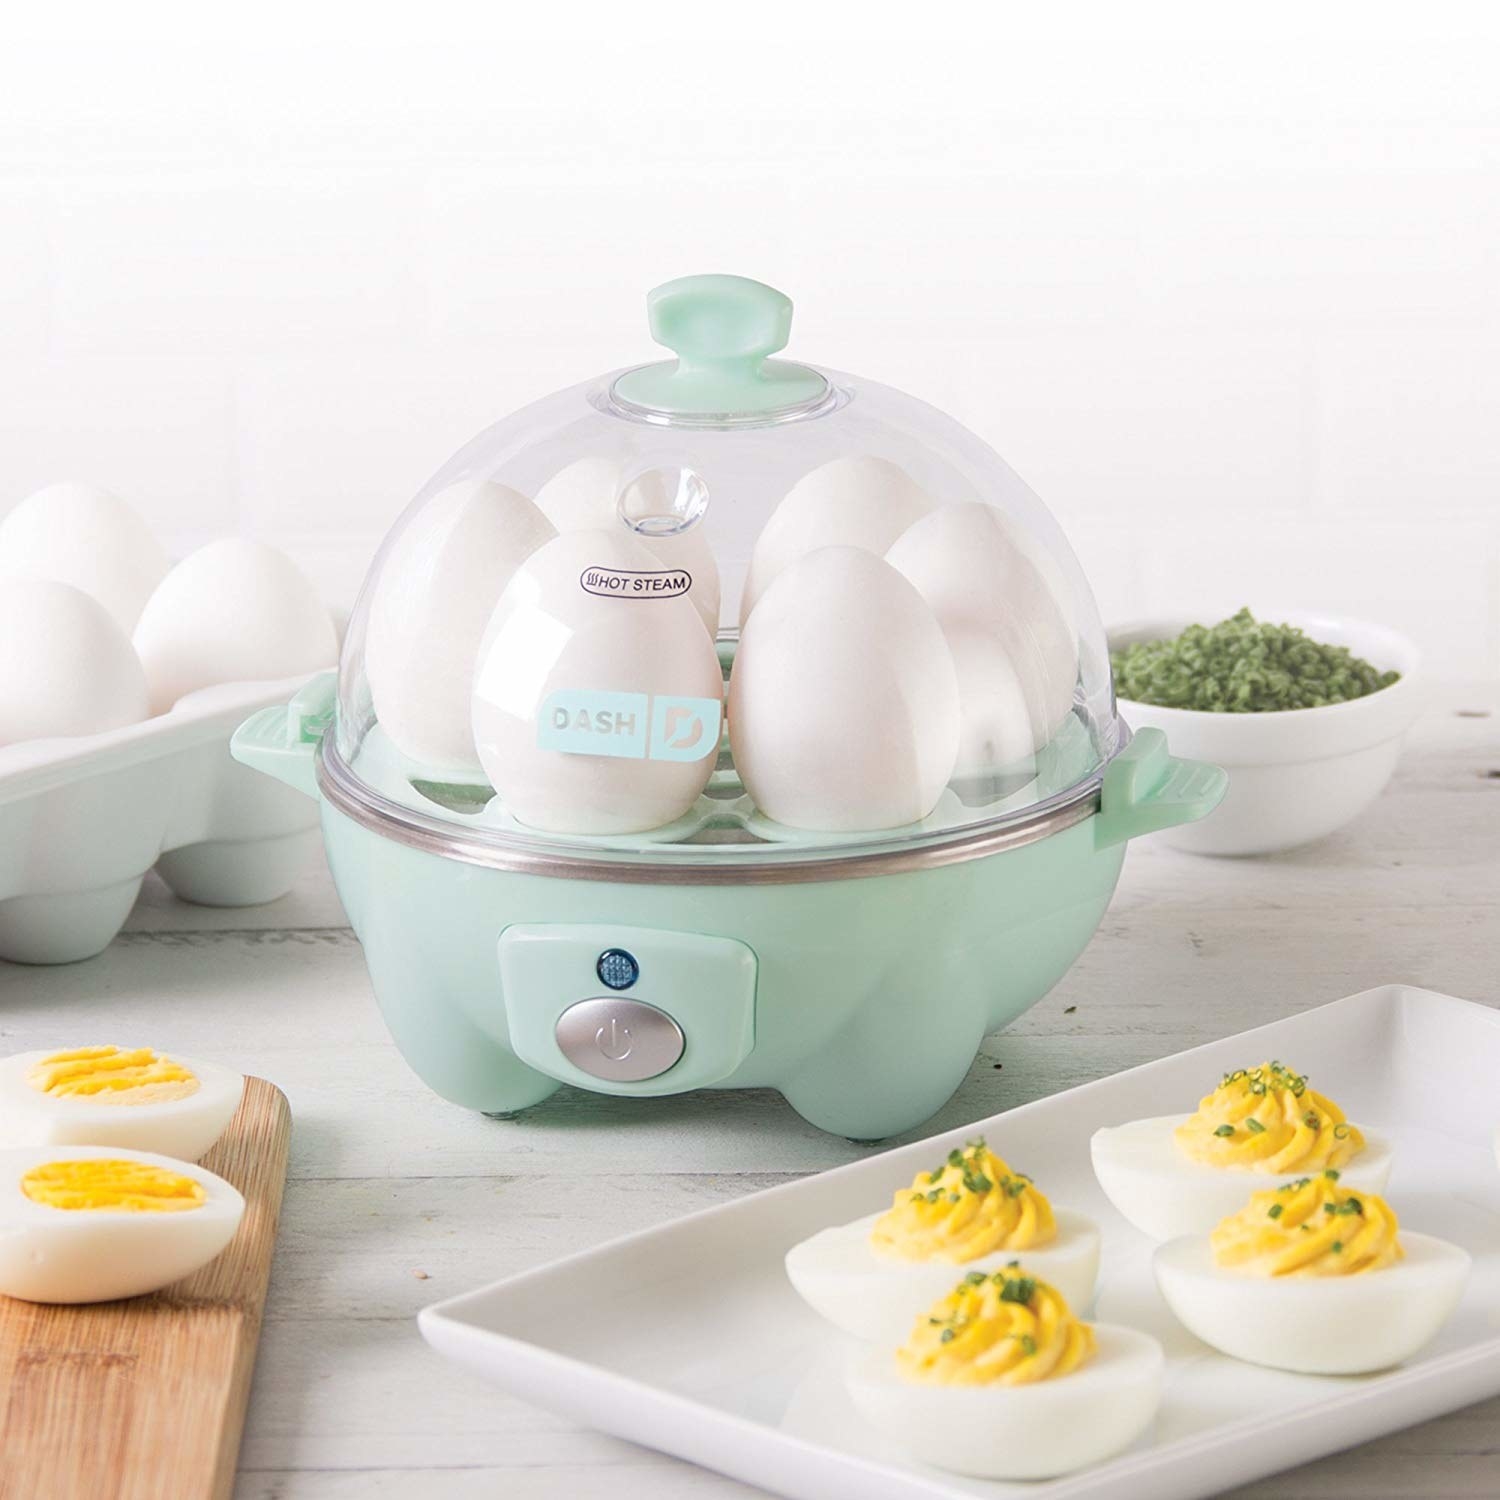 egg maker with eggs in it 